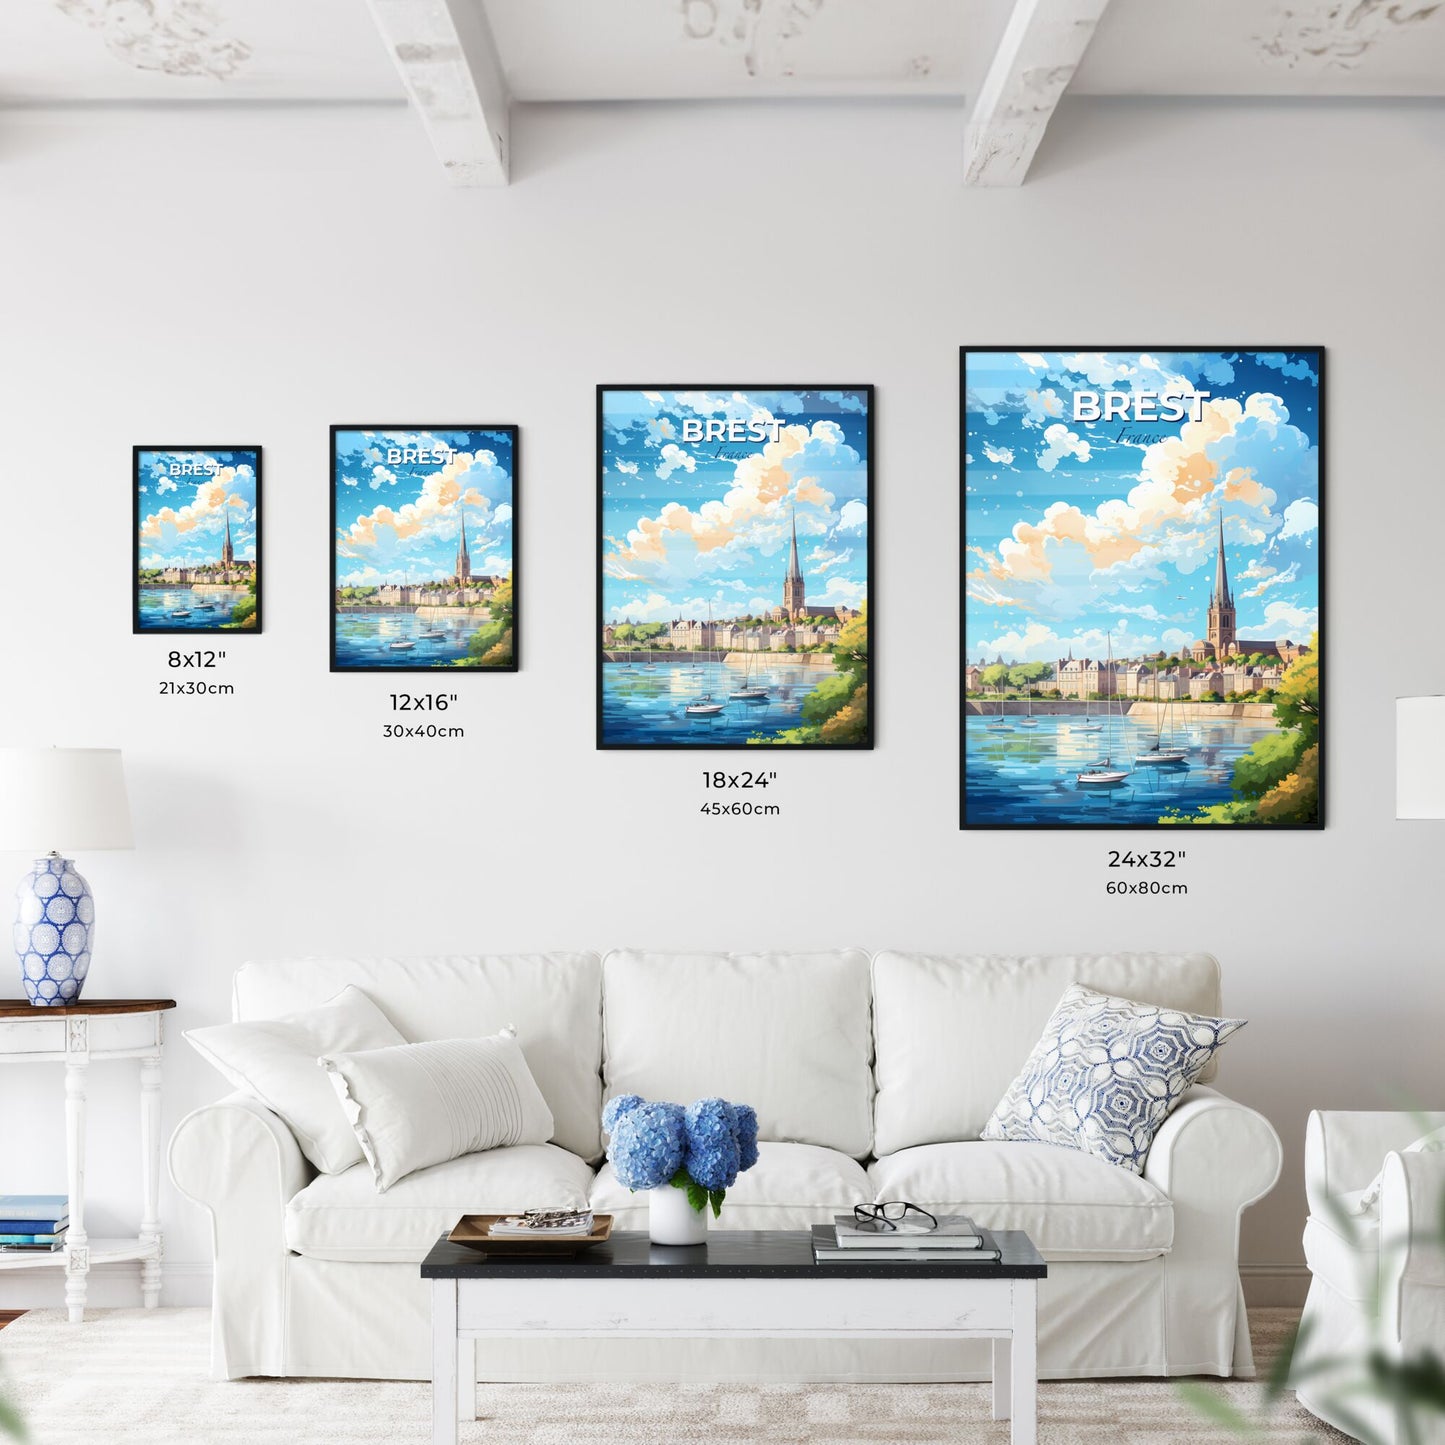 Brest France Skyline - A Water Body With Boats And Buildings In The Background - Customizable Travel Gift Default Title